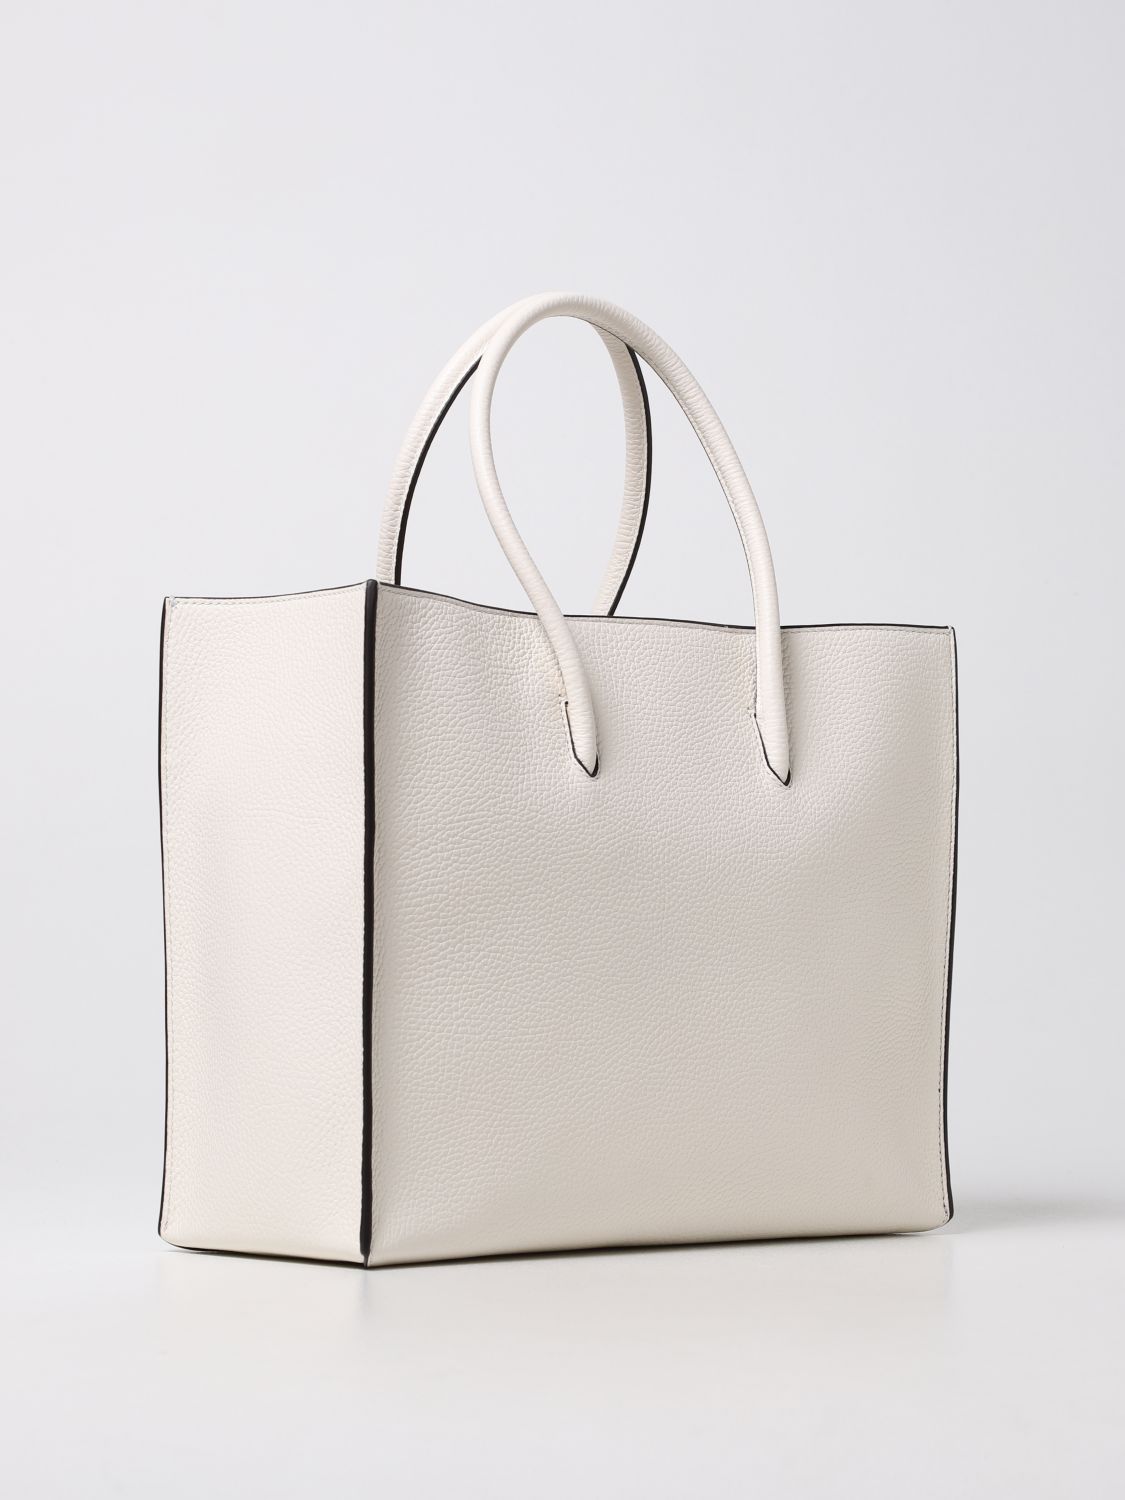 COCCINELLE: Myrtha bag in grained leather - White | Coccinelle tote ...